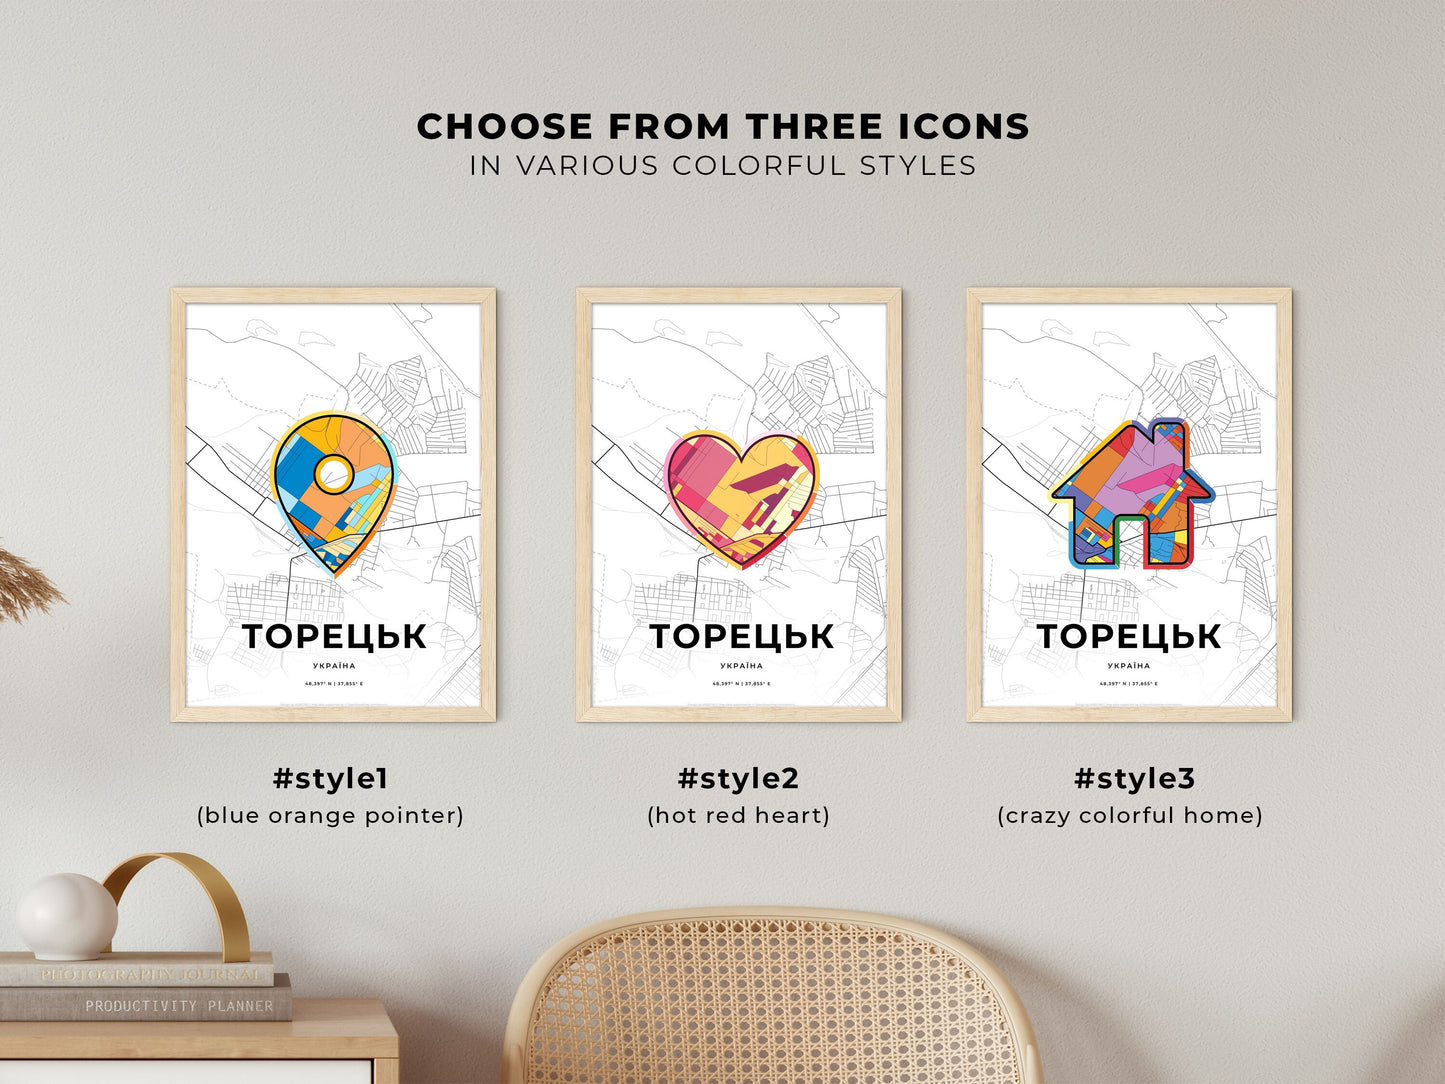 TORETSK UKRAINE minimal art map with a colorful icon. Where it all began, Couple map gift.